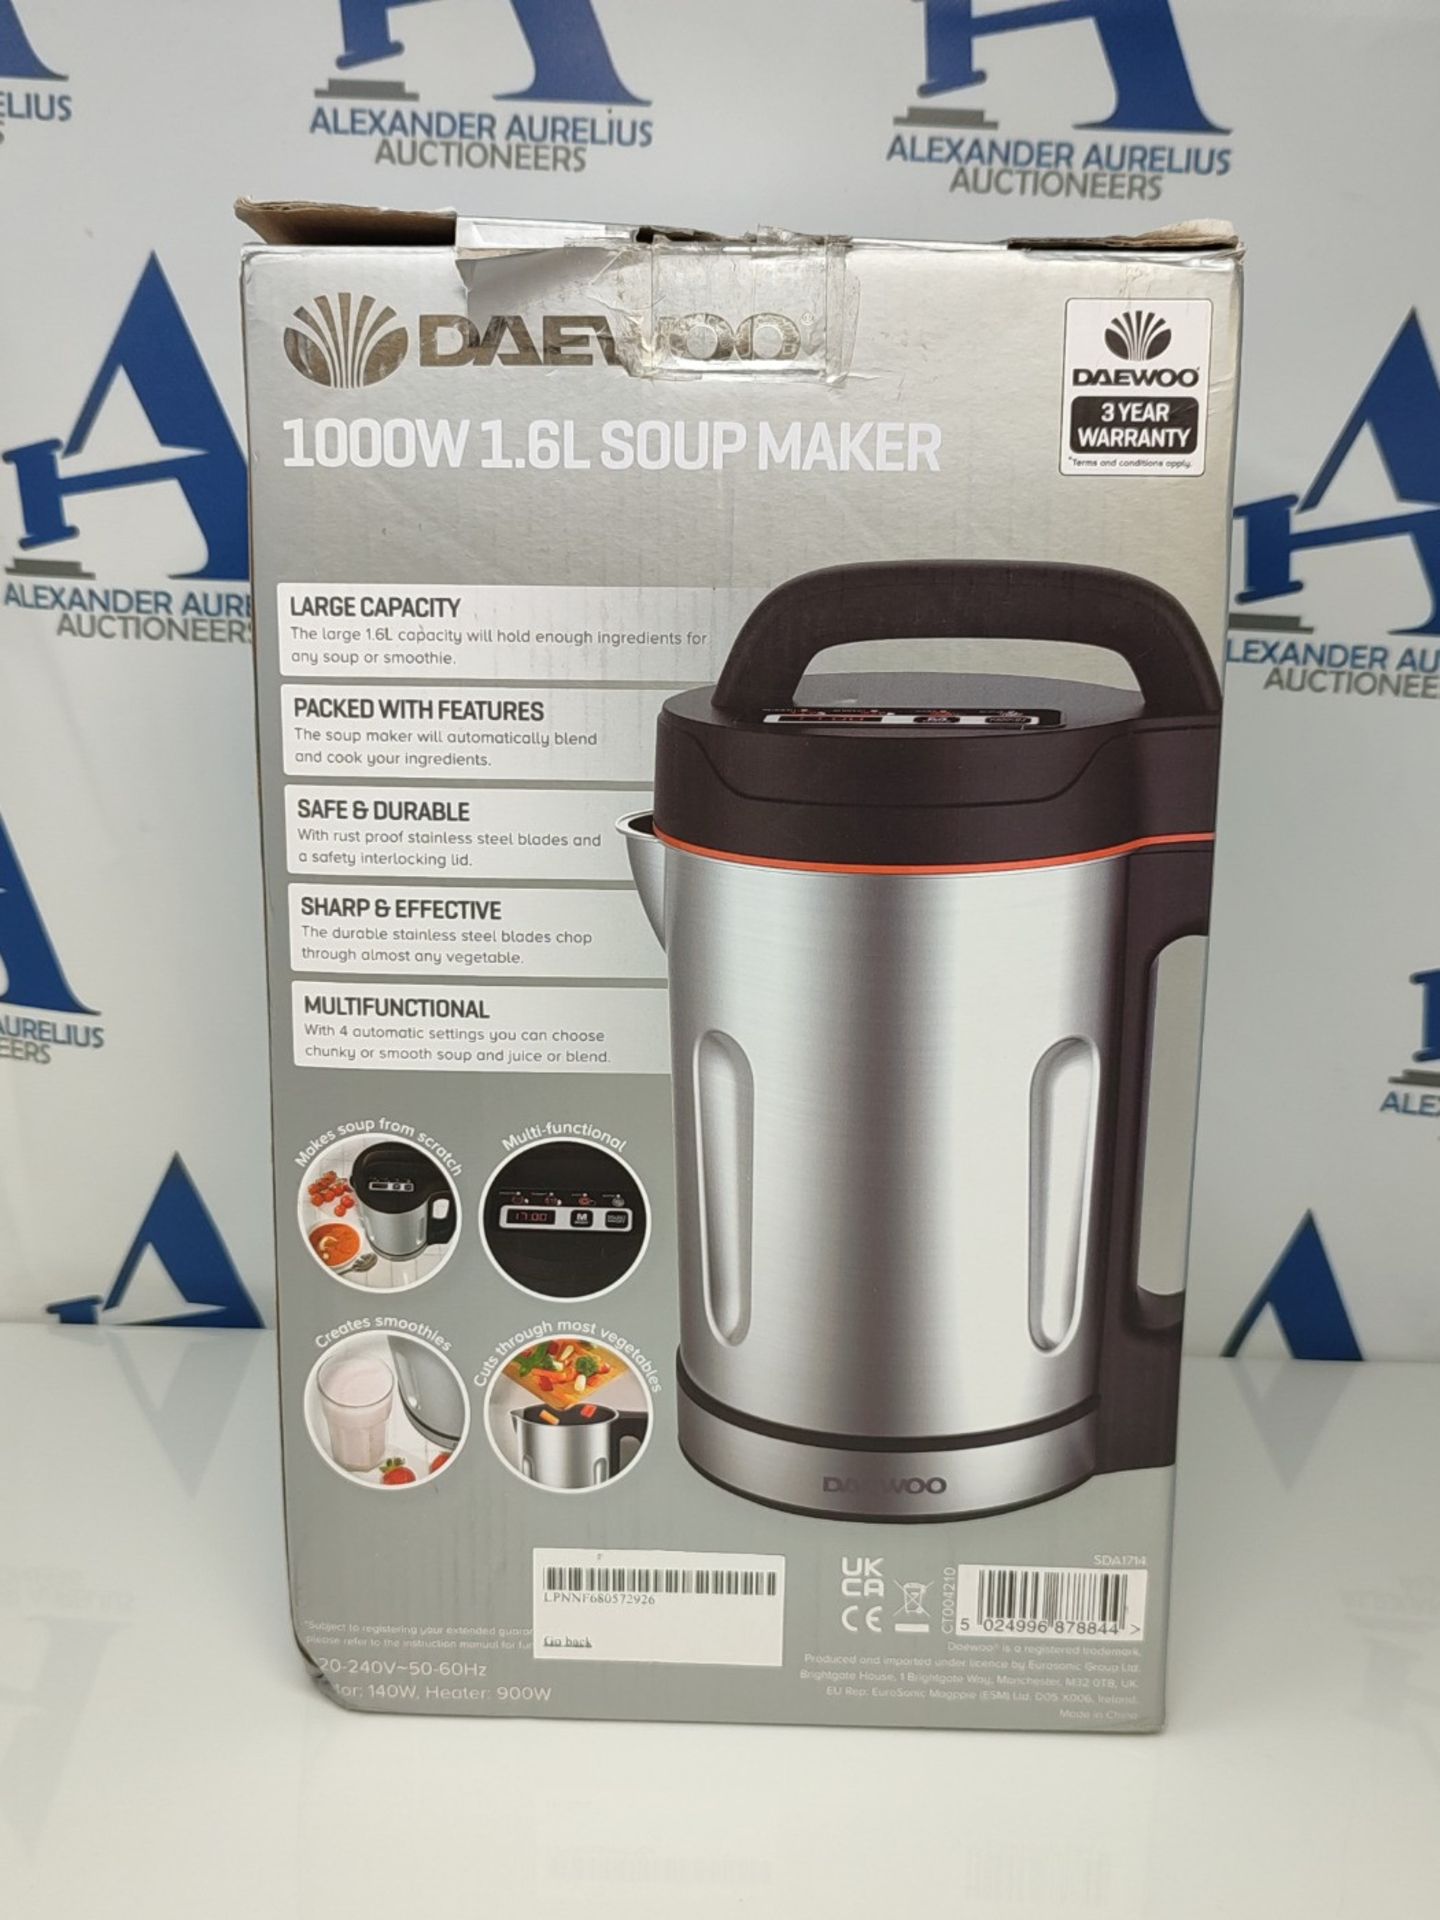 Daewoo SDA1714 Soup Maker | Usage-1000W | 1.6L Capacity | Ideal for Smooth & Chunky So - Image 2 of 3